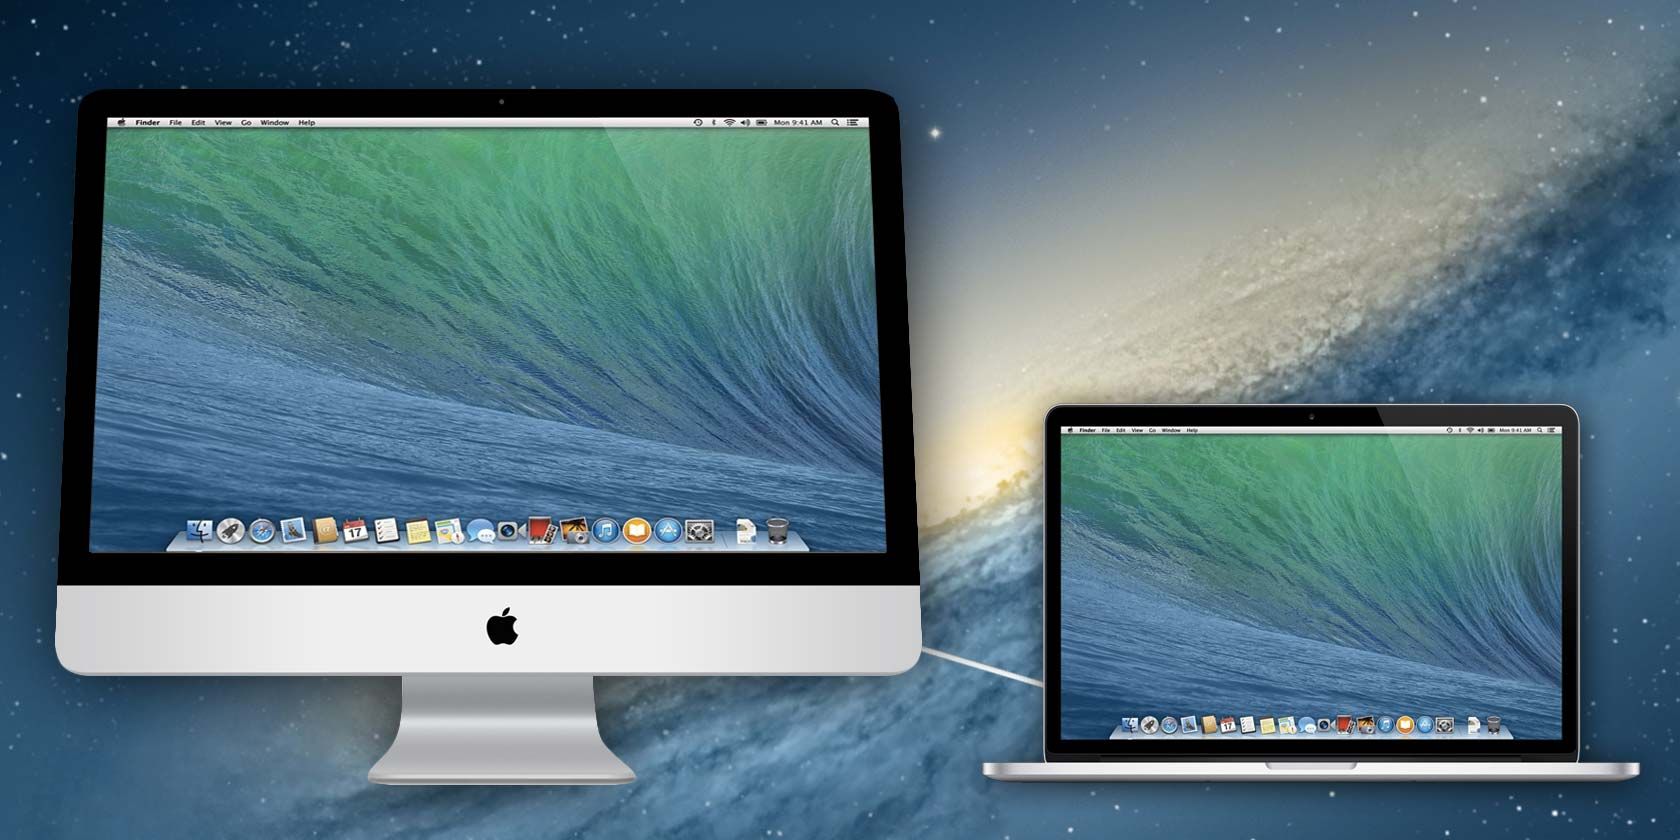 How to use imac as monitor for xbox one